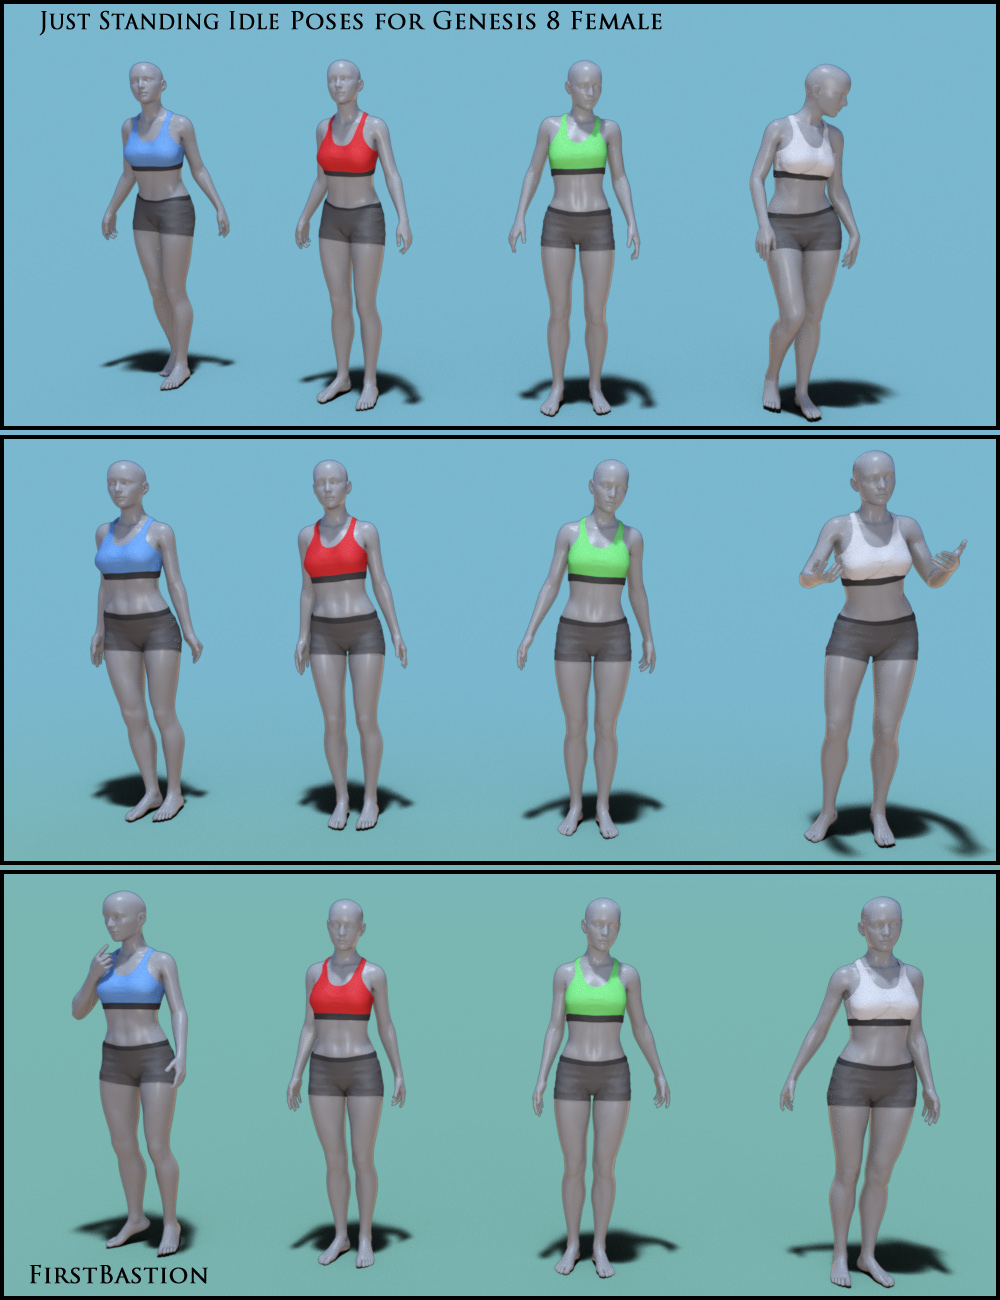 1stB Just Standing Idle Poses for Genesis 8 Female by: FirstBastion, 3D Models by Daz 3D